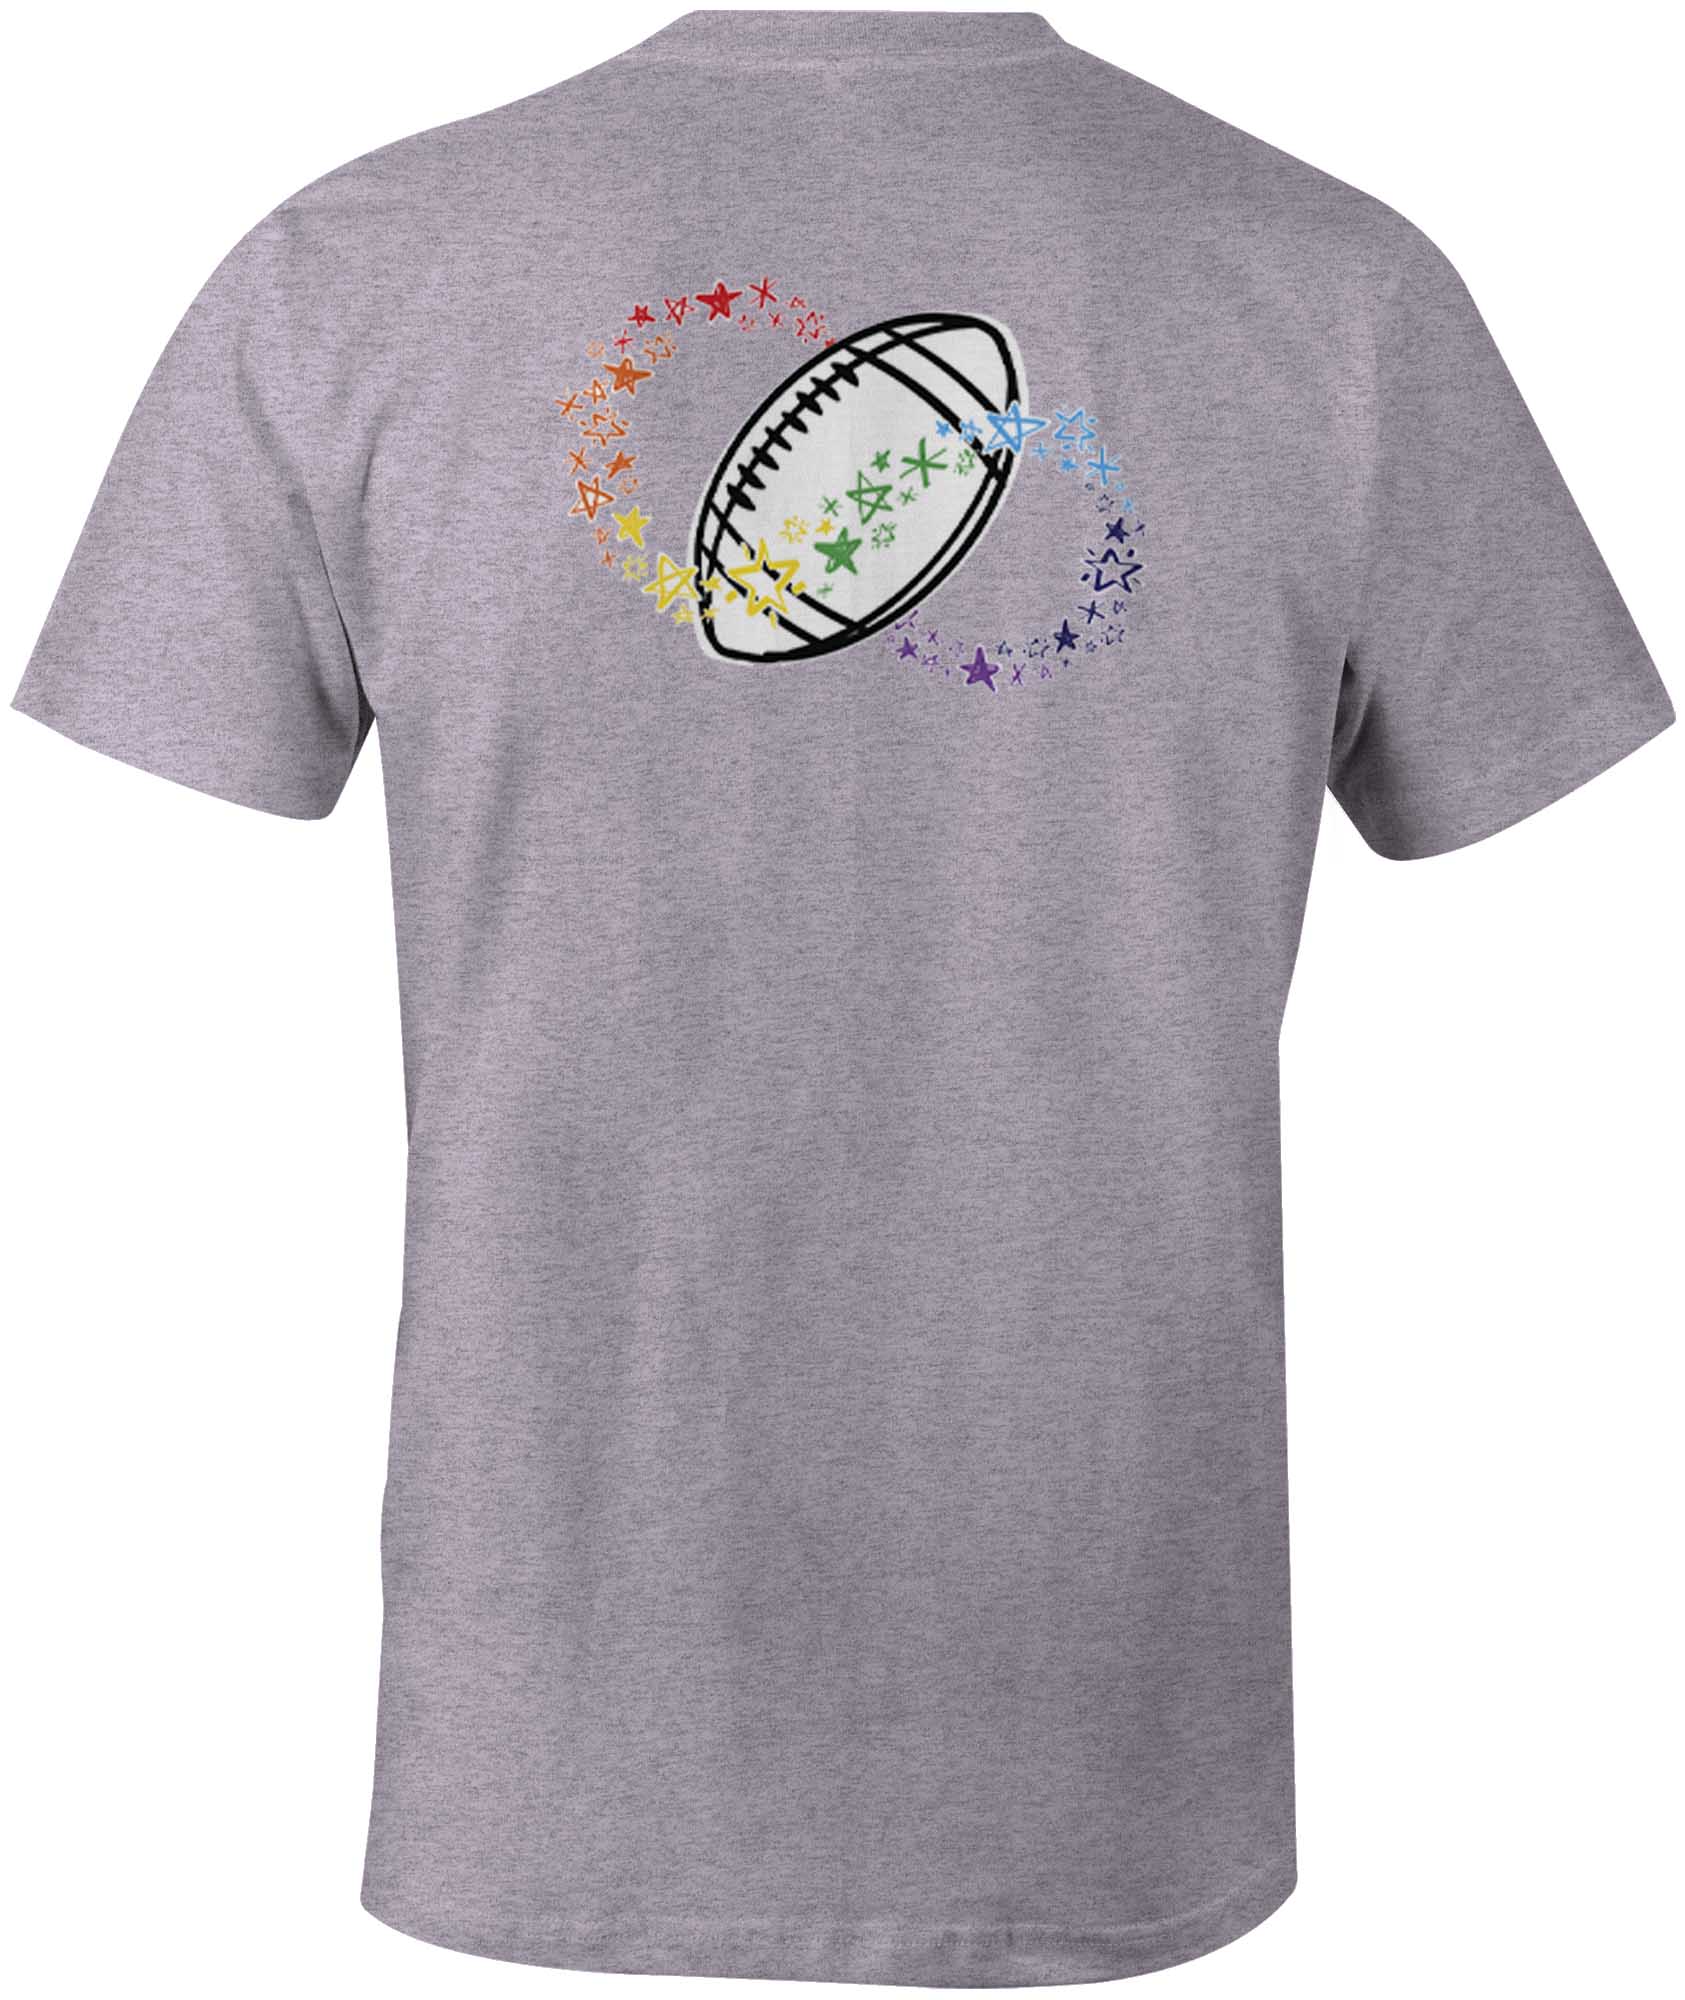 Autism 2021 Match Double Sided T Shirt